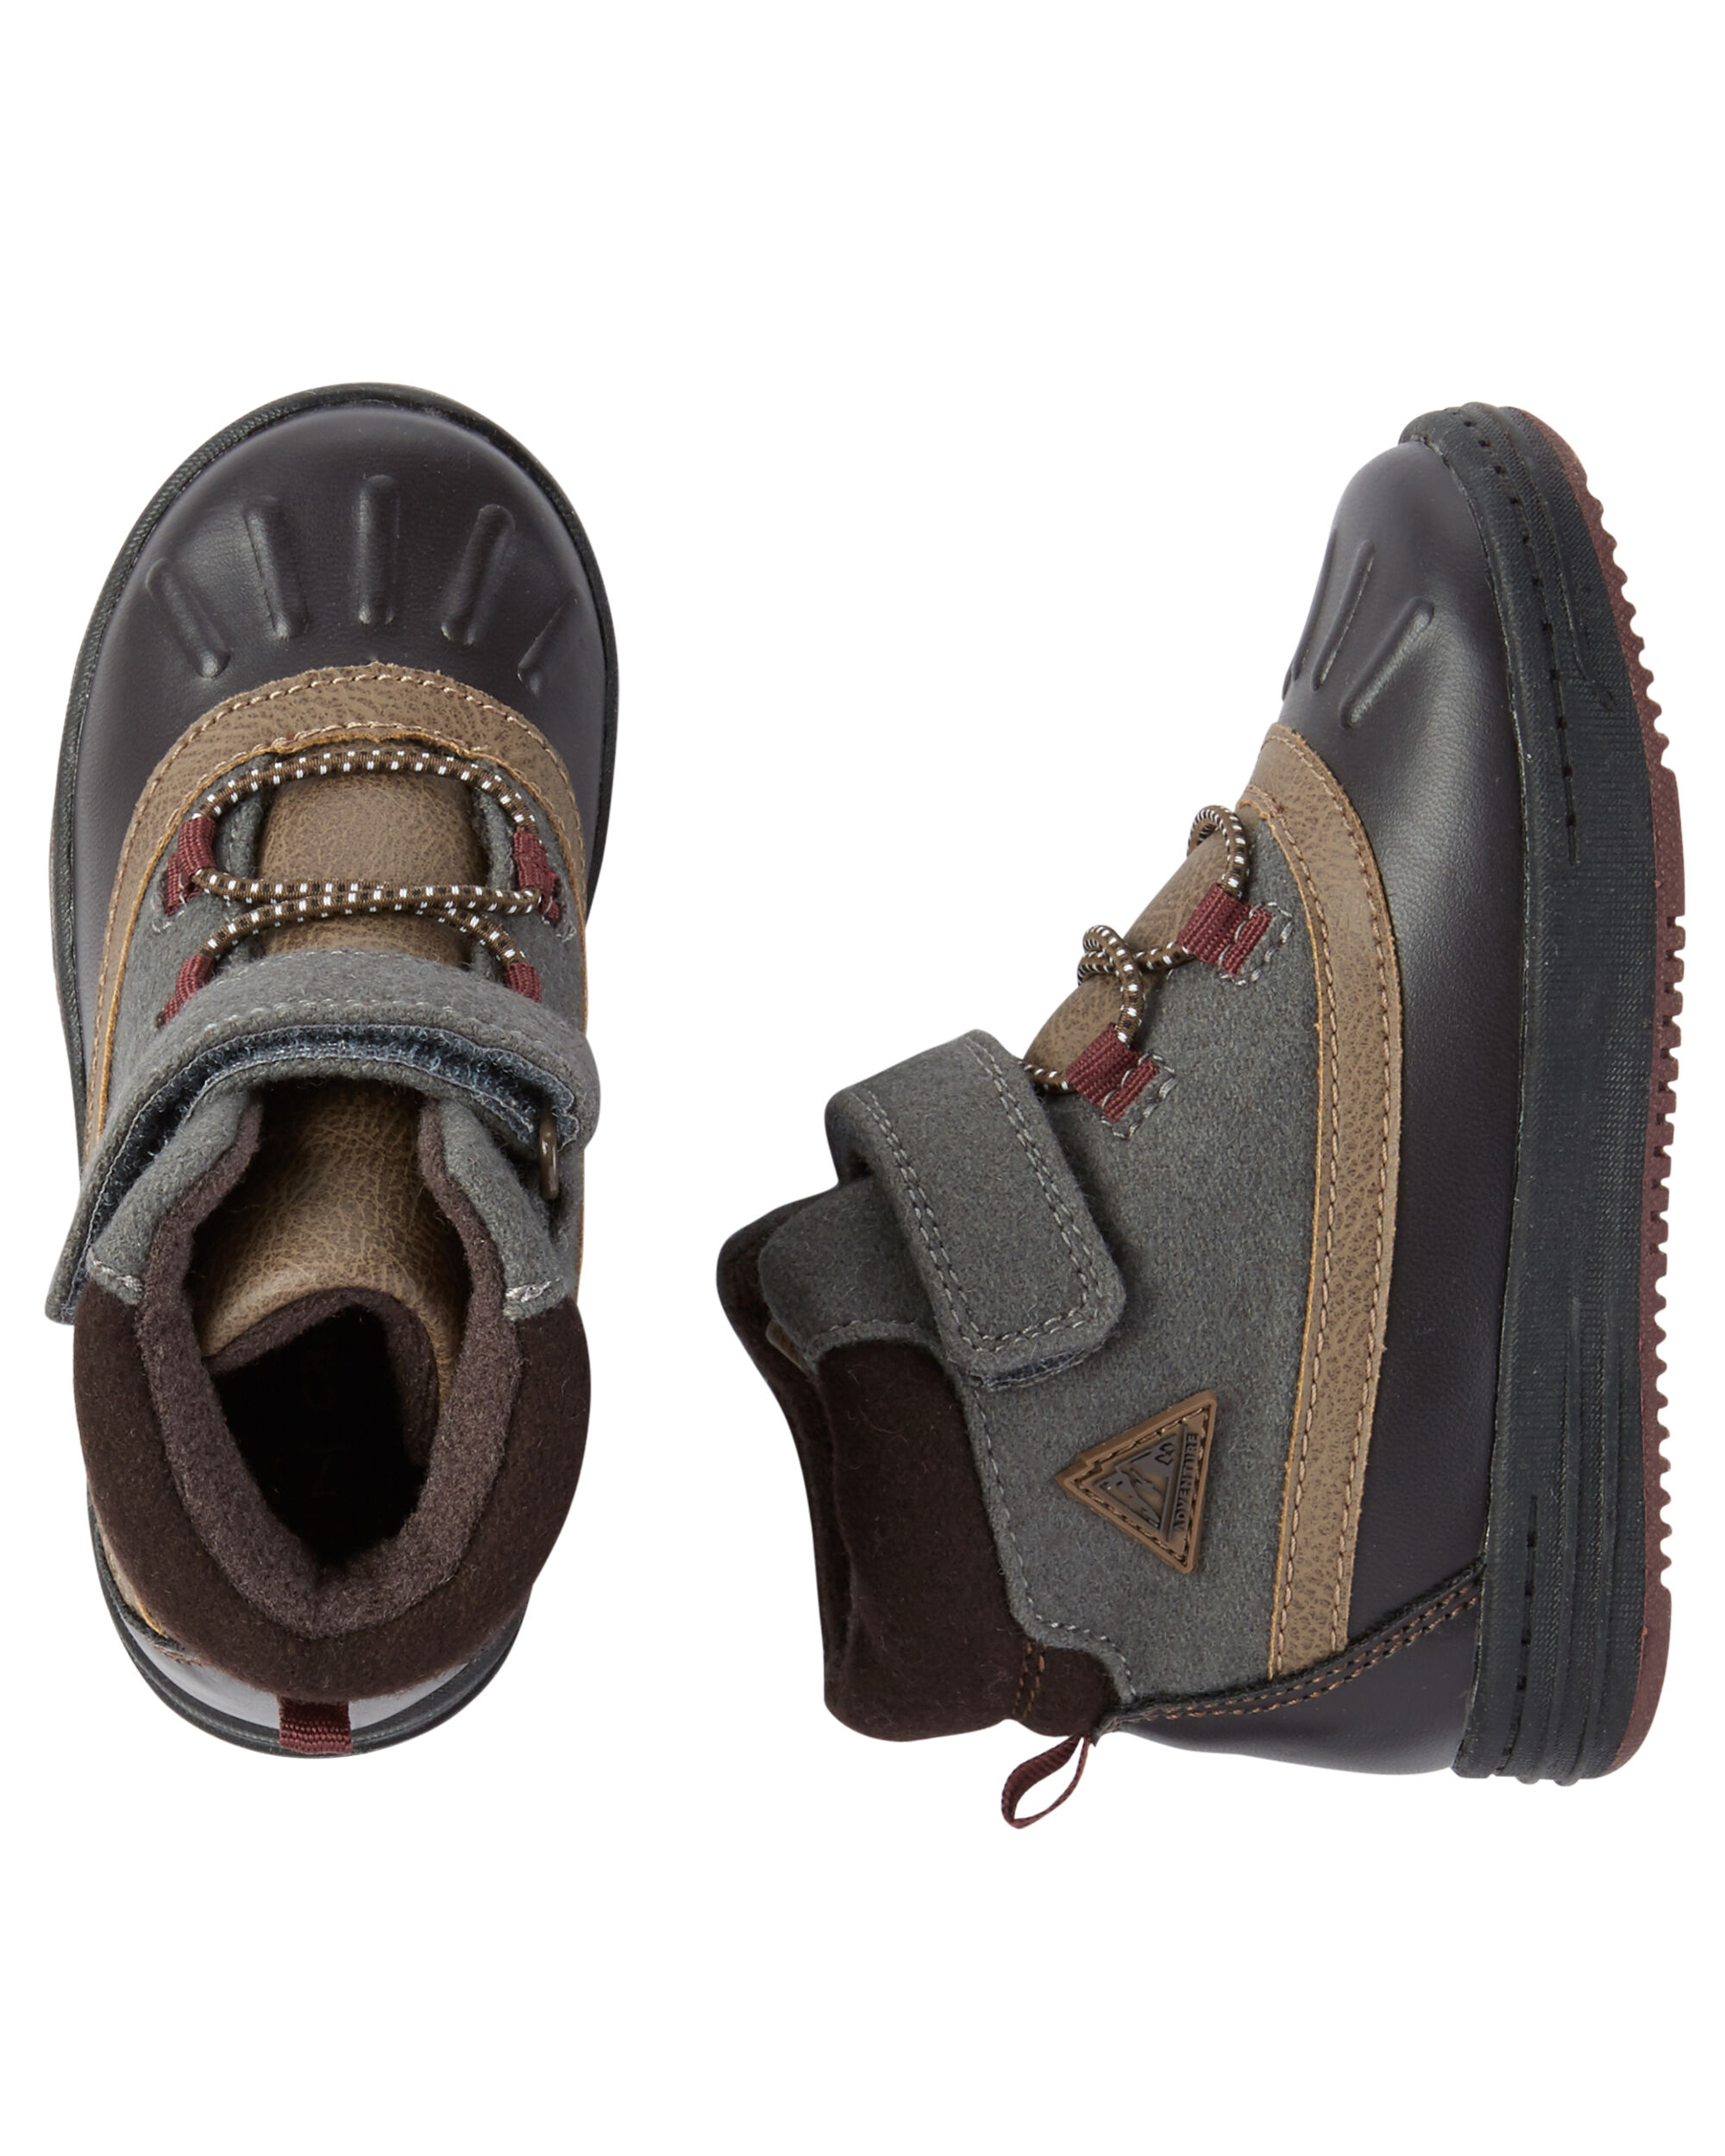 hiking boots for toddlers